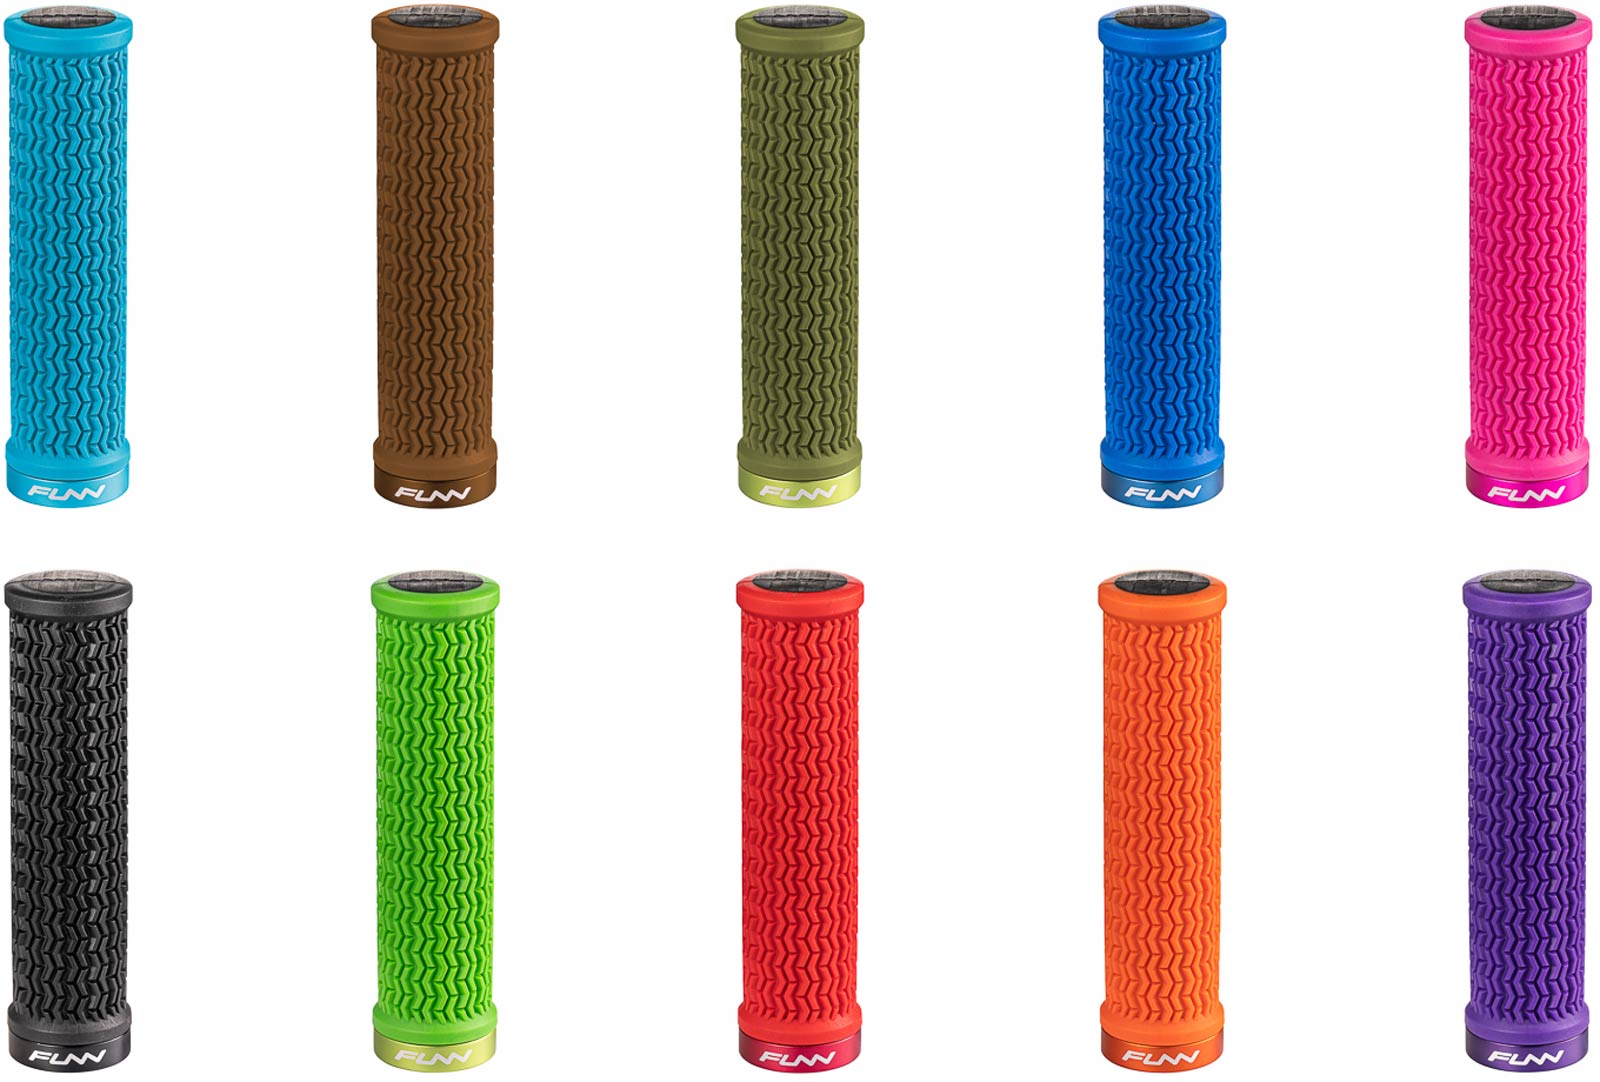 funn holeshot mtb grips 10 colors choose from